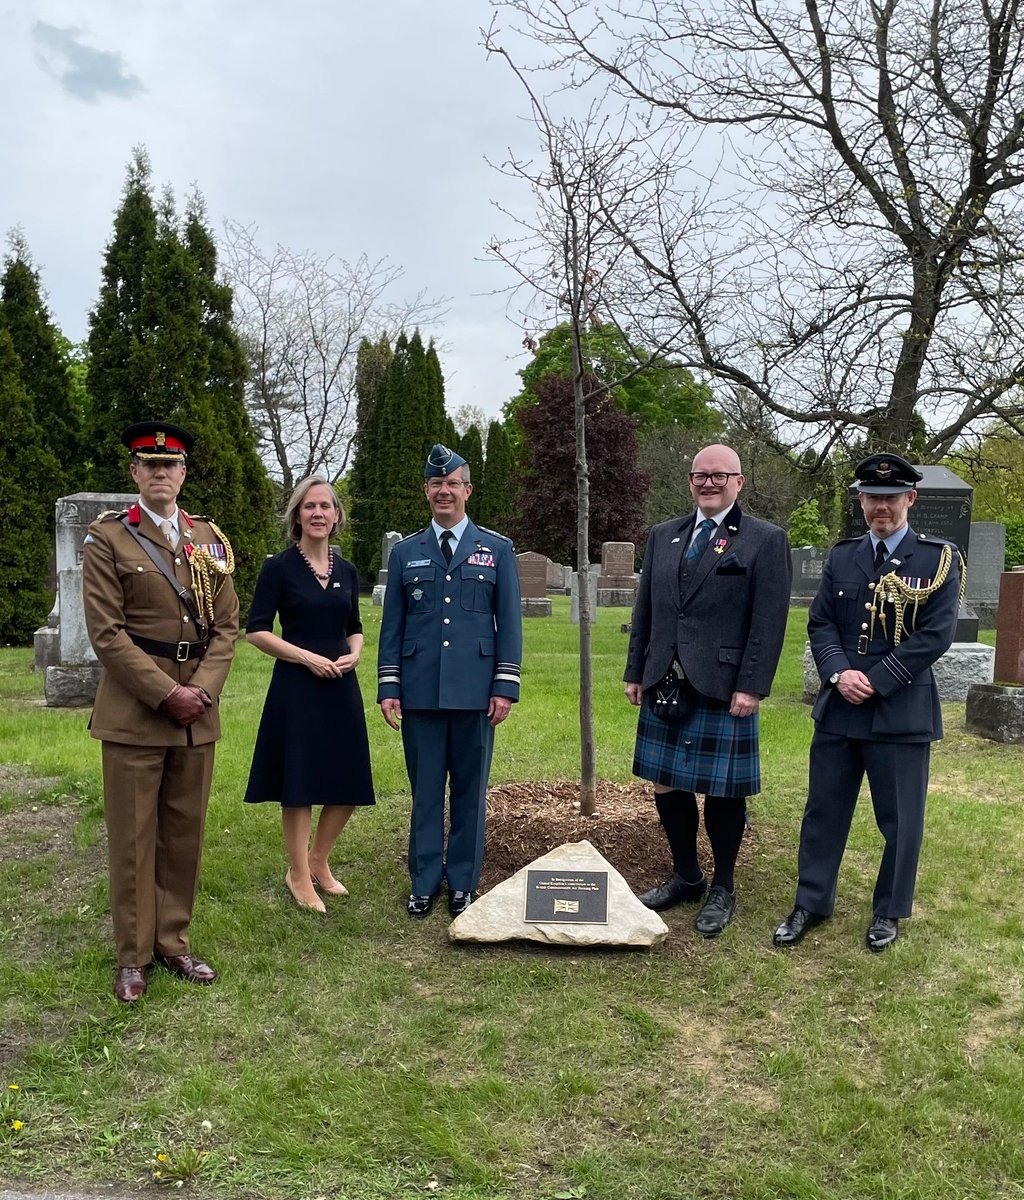 We’re proud to commemorate 100 years of the @RCAF_ARC. The UK’s contribution to this memorial came from Glasgow Prestwick Airport 🏴󠁧󠁢󠁳󠁣󠁴󠁿—mirroring the route @RoyalAirForce pilots took to train in Canada during #WWII and symbolizing the long-standing link between the RAF and RCAF. ✈️